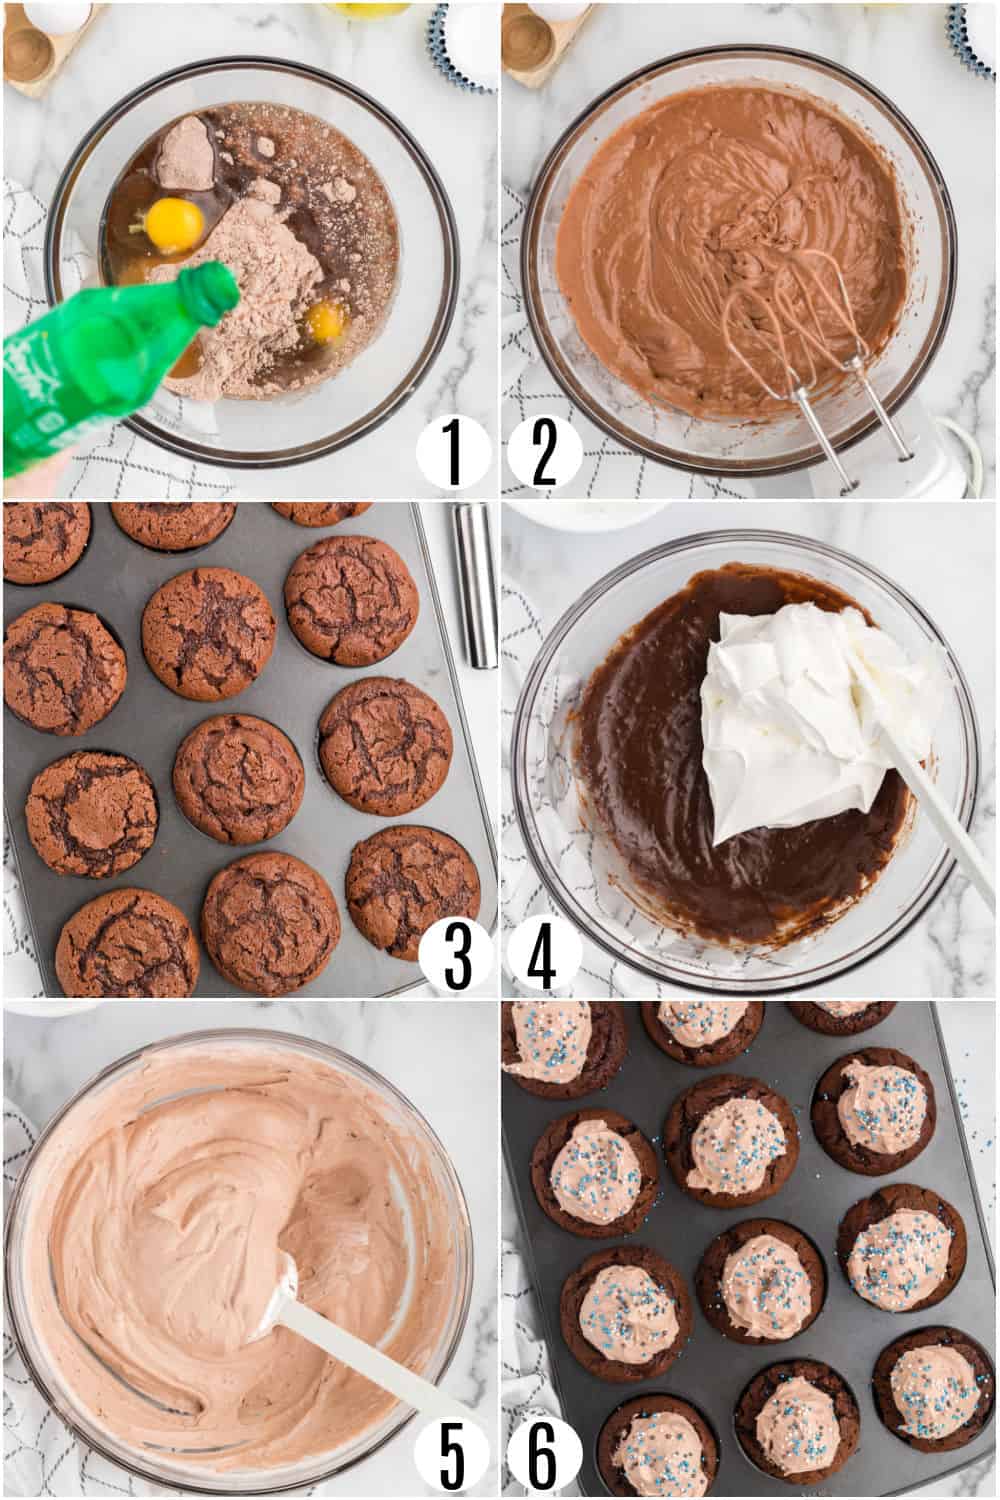 Step by step photos showing how to make chocolate pudding cupcakes.